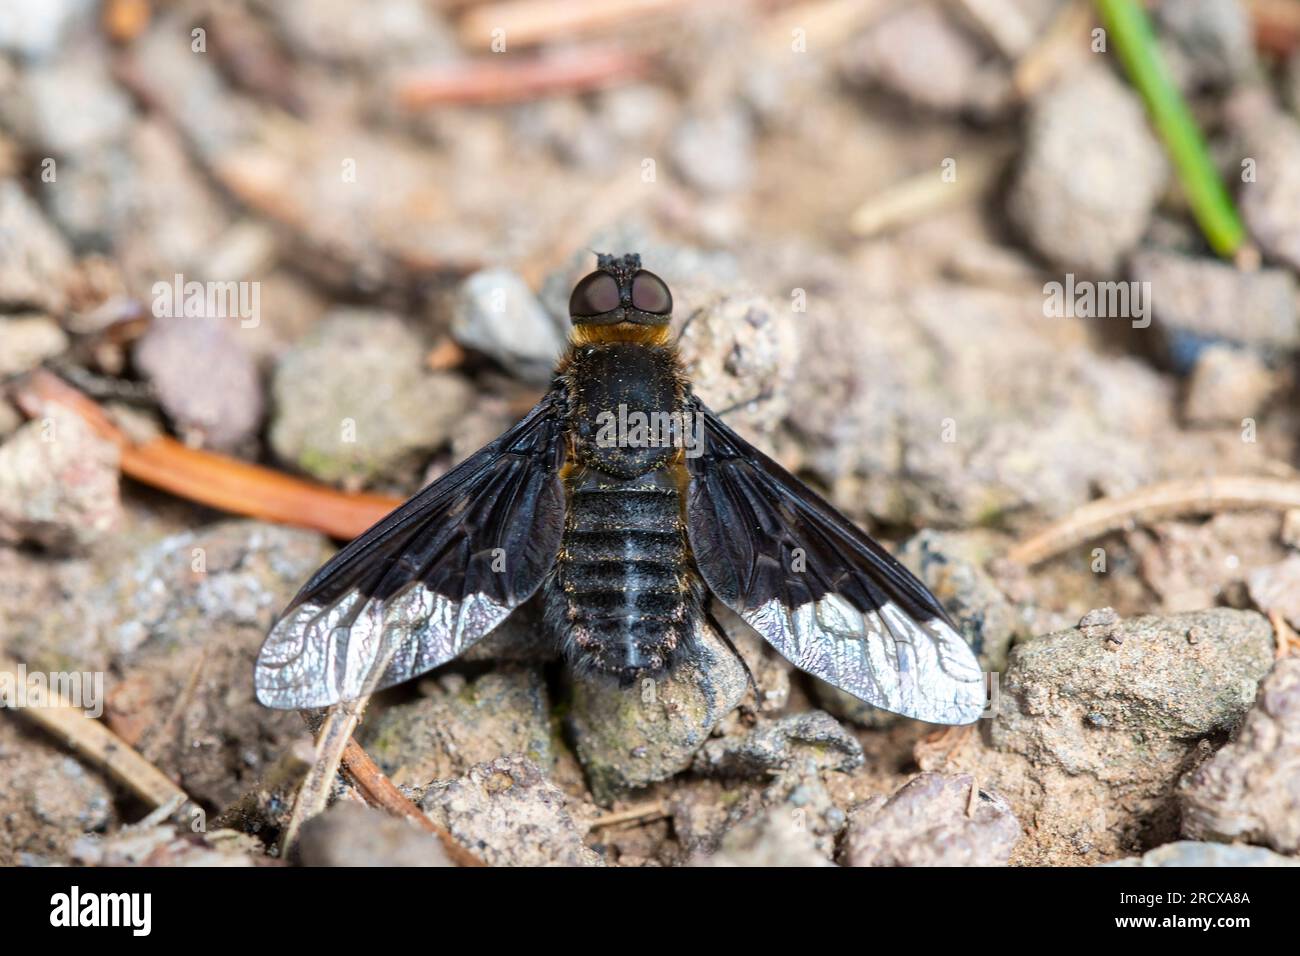 Black Banded Bee Fly (Hemipenthes morio), sitting on the ground, Germany Stock Photo